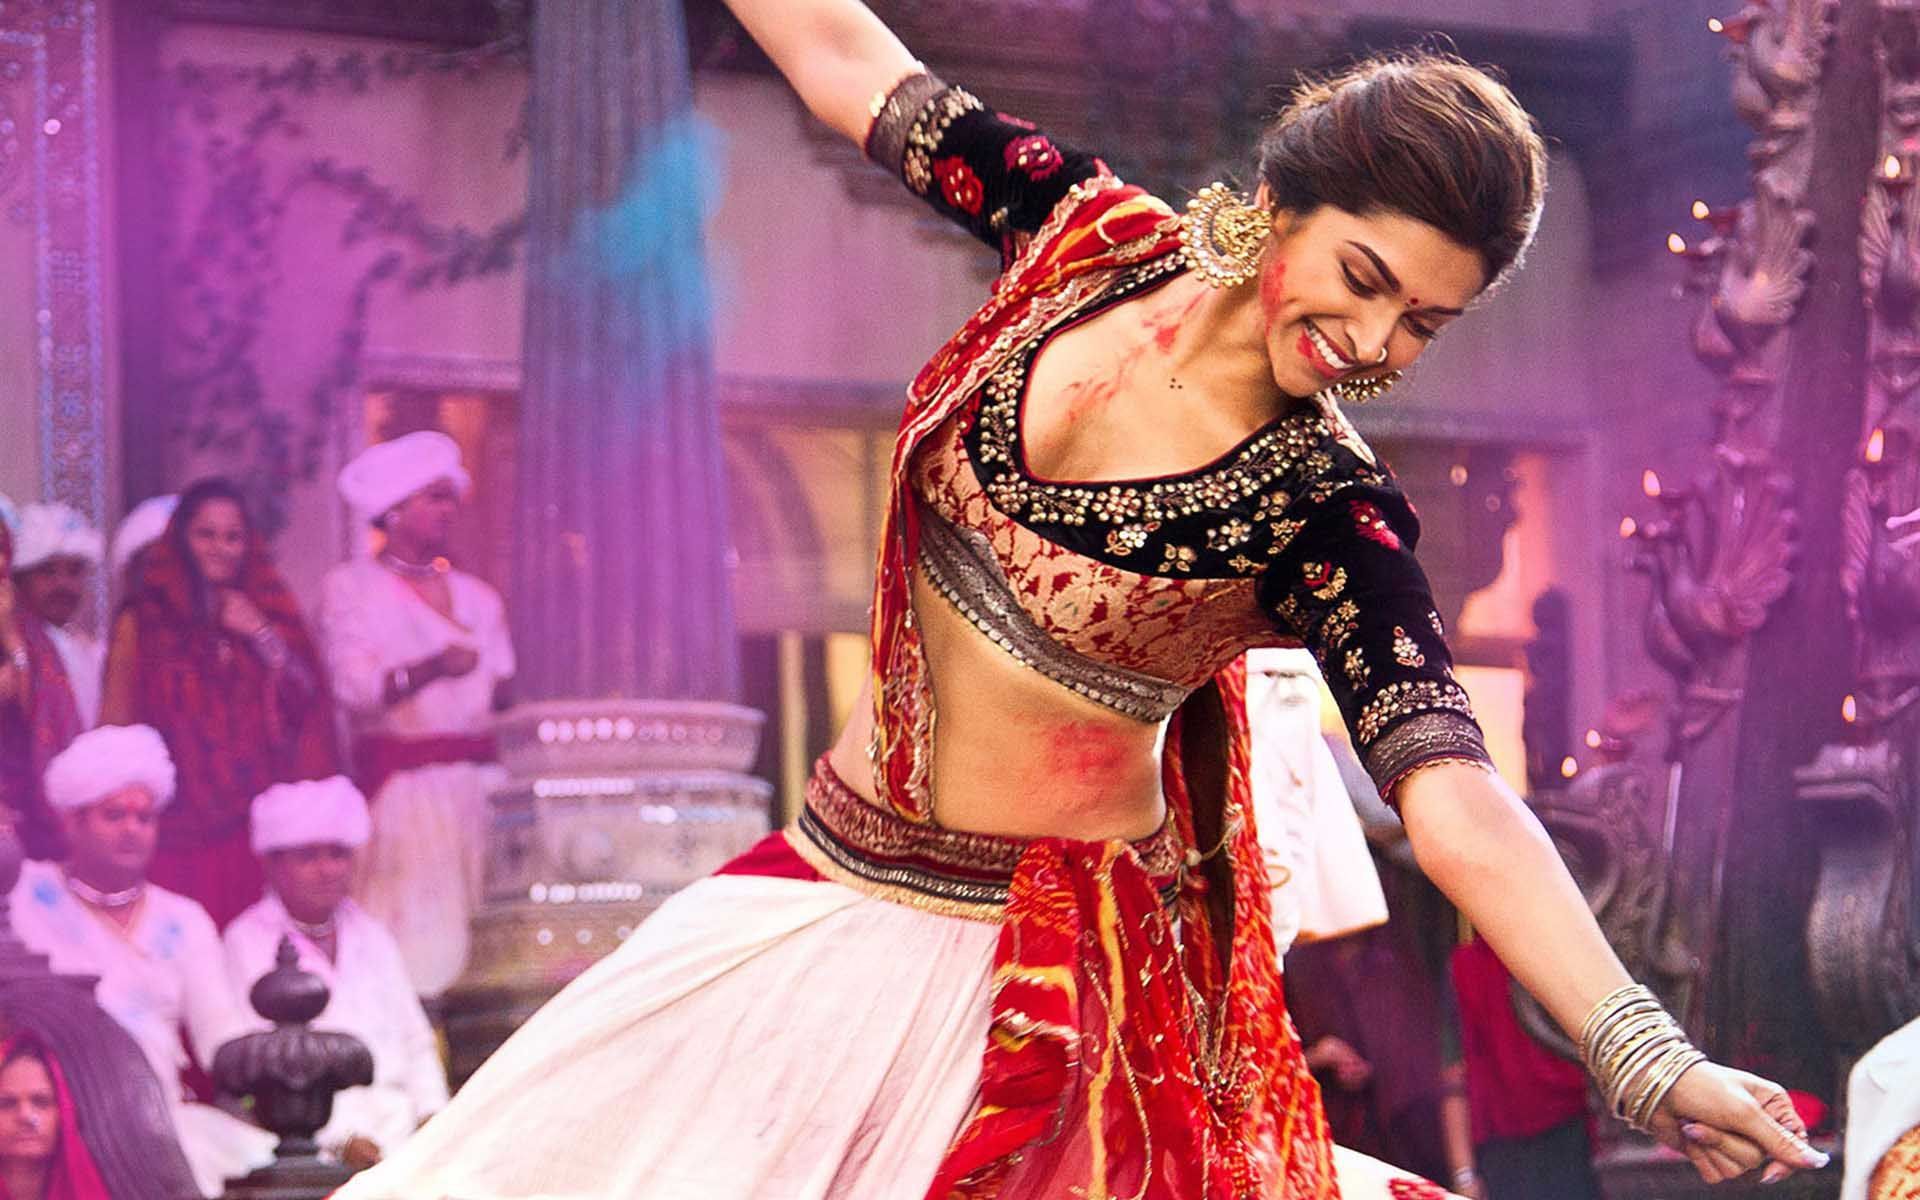 Dancing Deepika From The Movie Ram Leela. HD Bollywood Movies Wallpaper for Mobile and Desktop